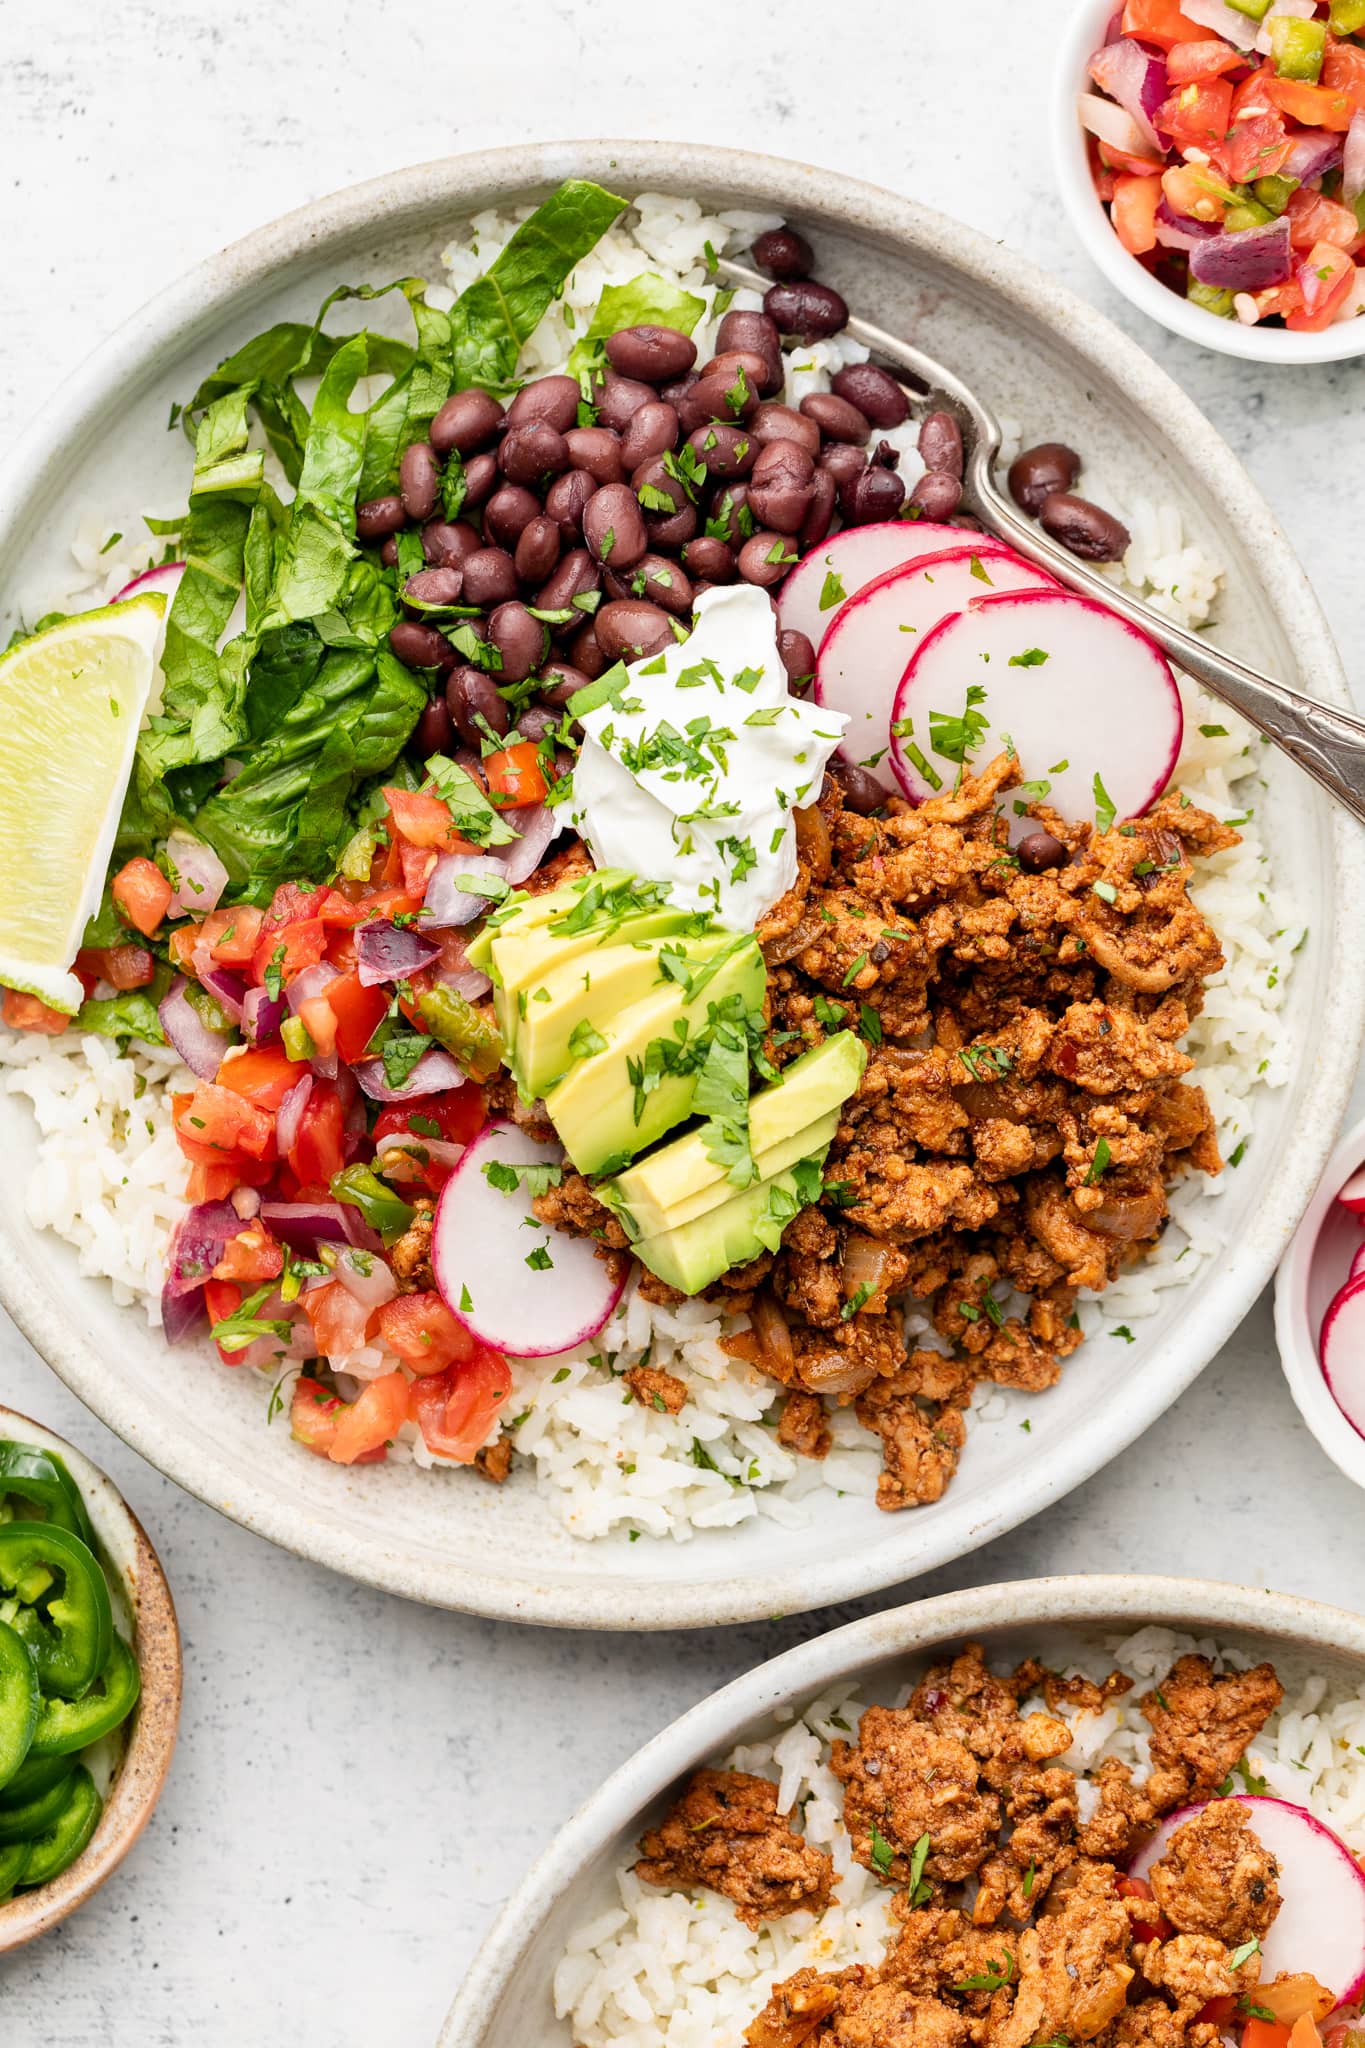 https://allthehealthythings.com/wp-content/uploads/2022/01/turkey-burrito-bowls-6.jpg